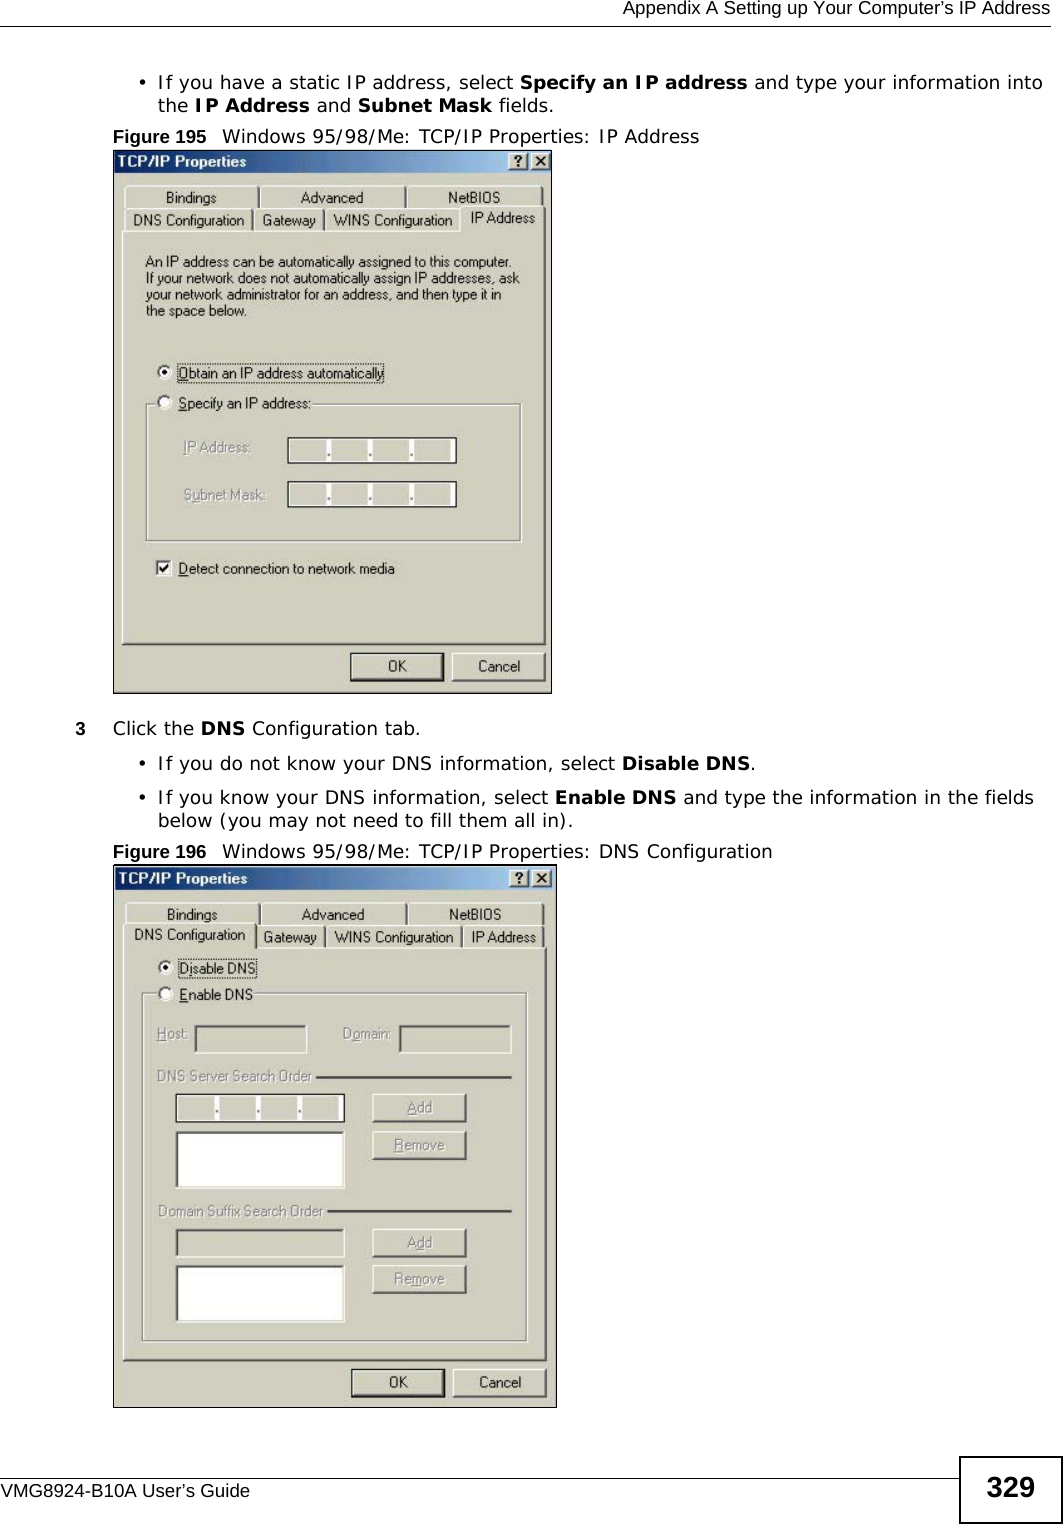  Appendix A Setting up Your Computer’s IP AddressVMG8924-B10A User’s Guide 329• If you have a static IP address, select Specify an IP address and type your information into the IP Address and Subnet Mask fields.Figure 195   Windows 95/98/Me: TCP/IP Properties: IP Address3Click the DNS Configuration tab.• If you do not know your DNS information, select Disable DNS.• If you know your DNS information, select Enable DNS and type the information in the fields below (you may not need to fill them all in).Figure 196   Windows 95/98/Me: TCP/IP Properties: DNS Configuration